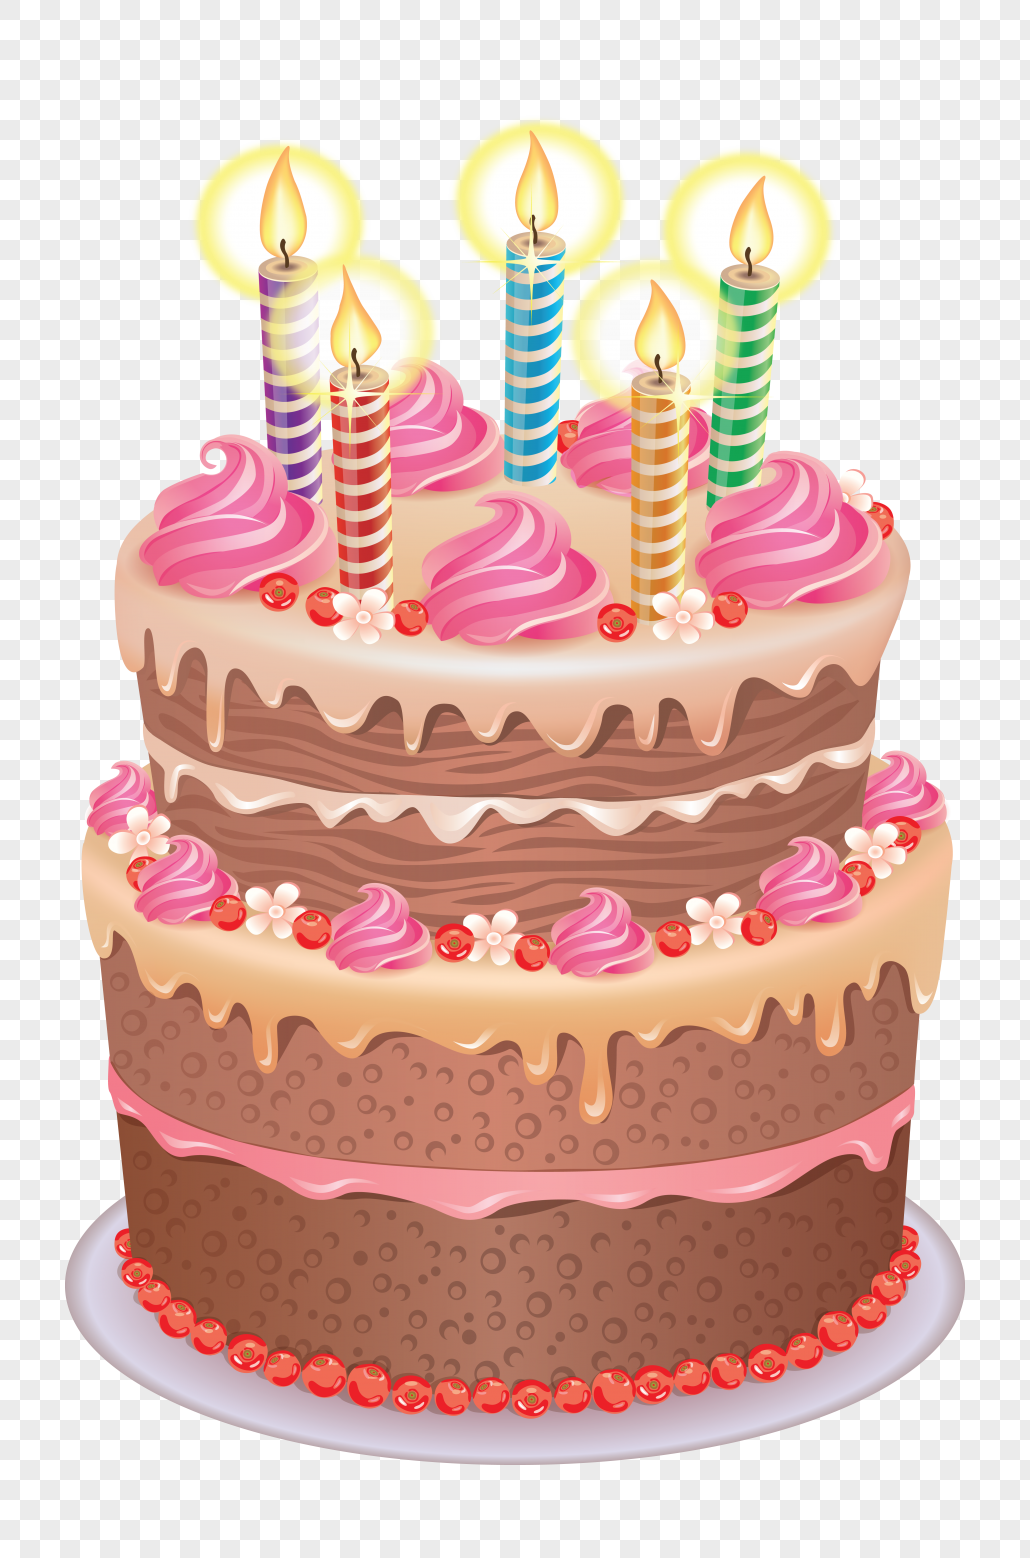 Cartoon cake png image picture free download 400695154 